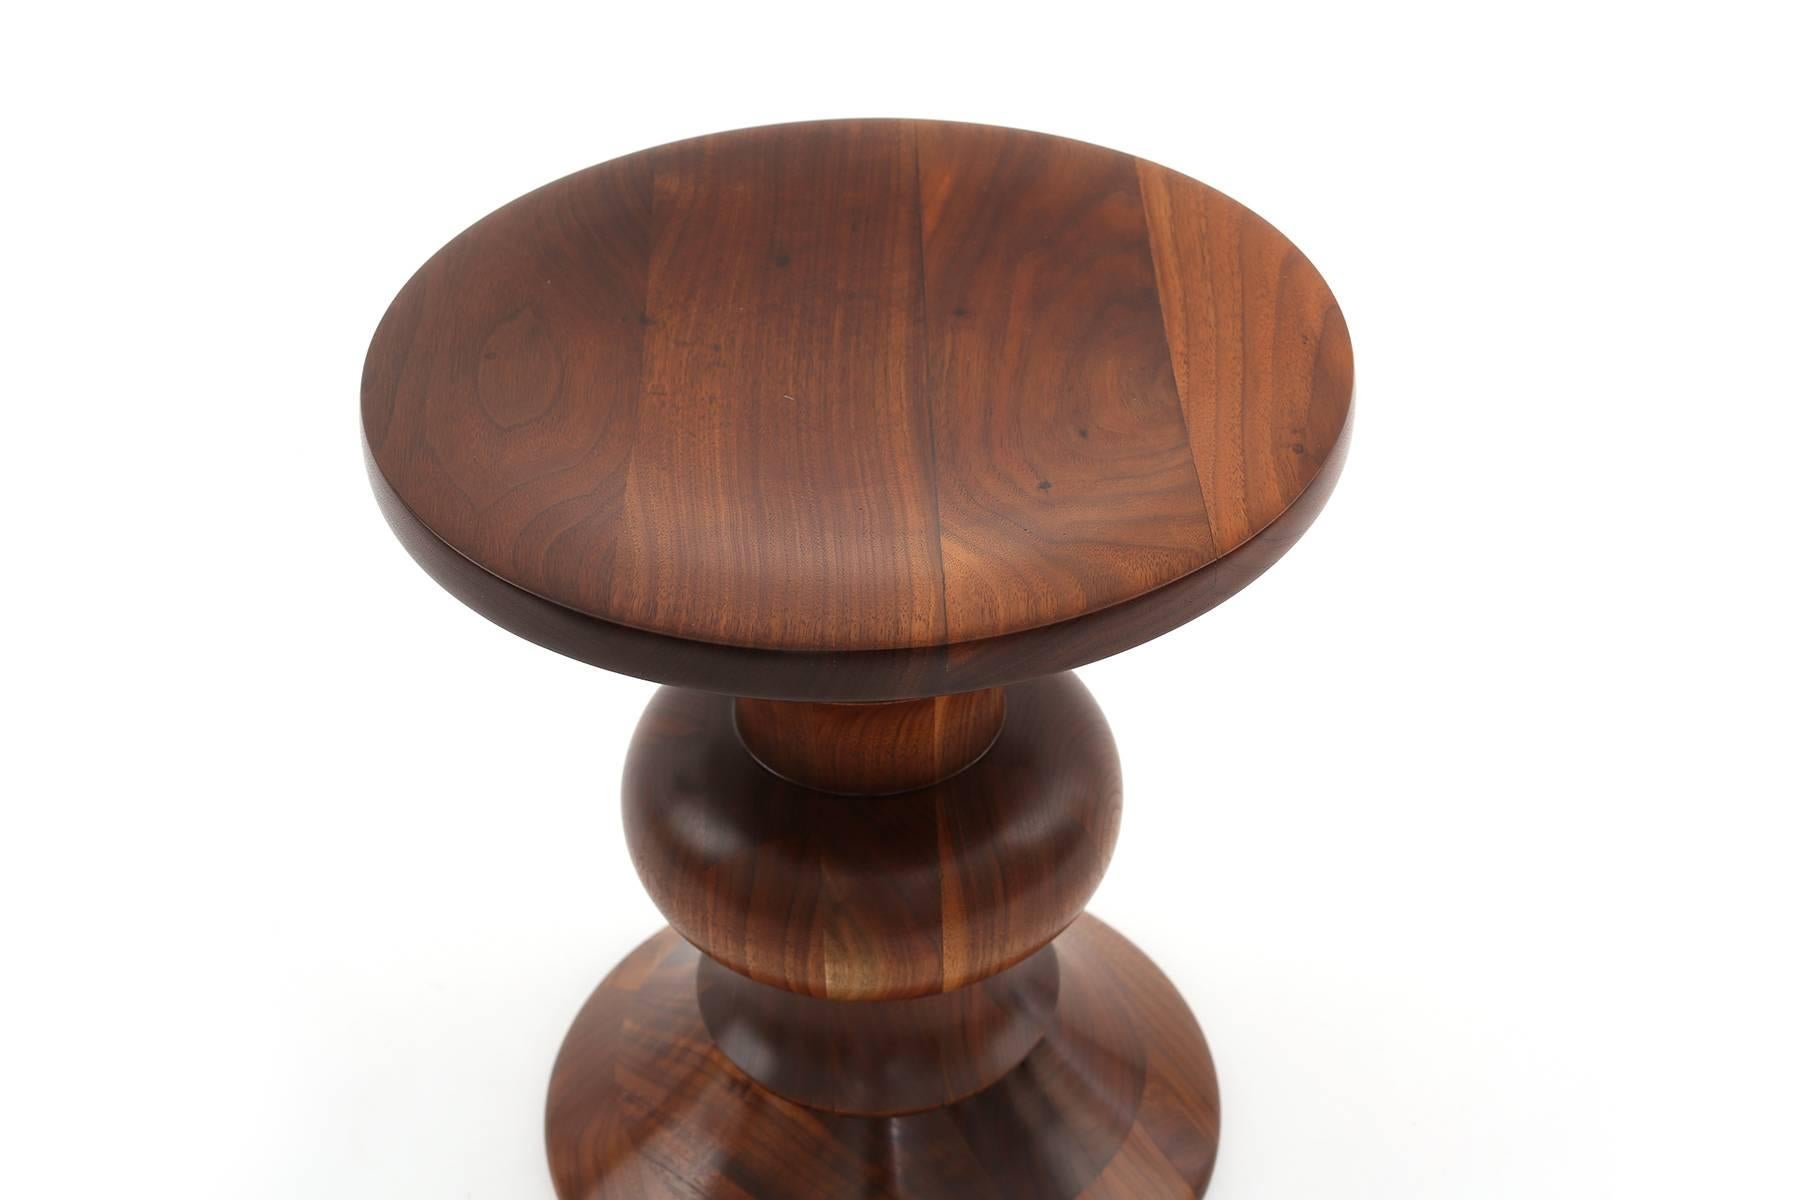 Charles and Ray Eames for Herman Miller time life stool, circa mid-1960s. This solid walnut example has incredible graining and is in excellent condition.